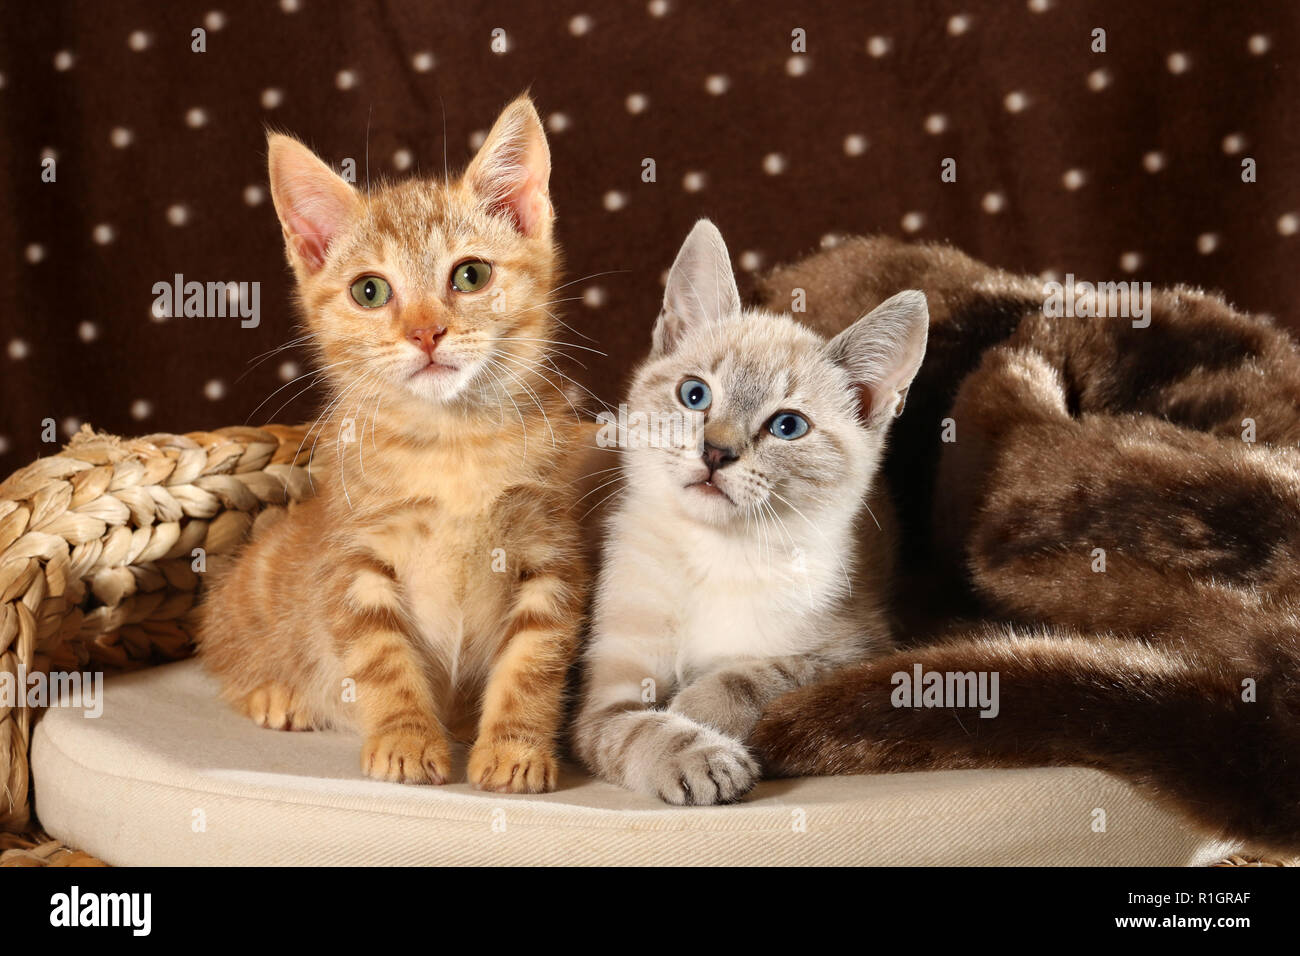 Deux chatons, 10 semaines, seal tabby point et red tabby ,assise sur un oreiller Banque D'Images